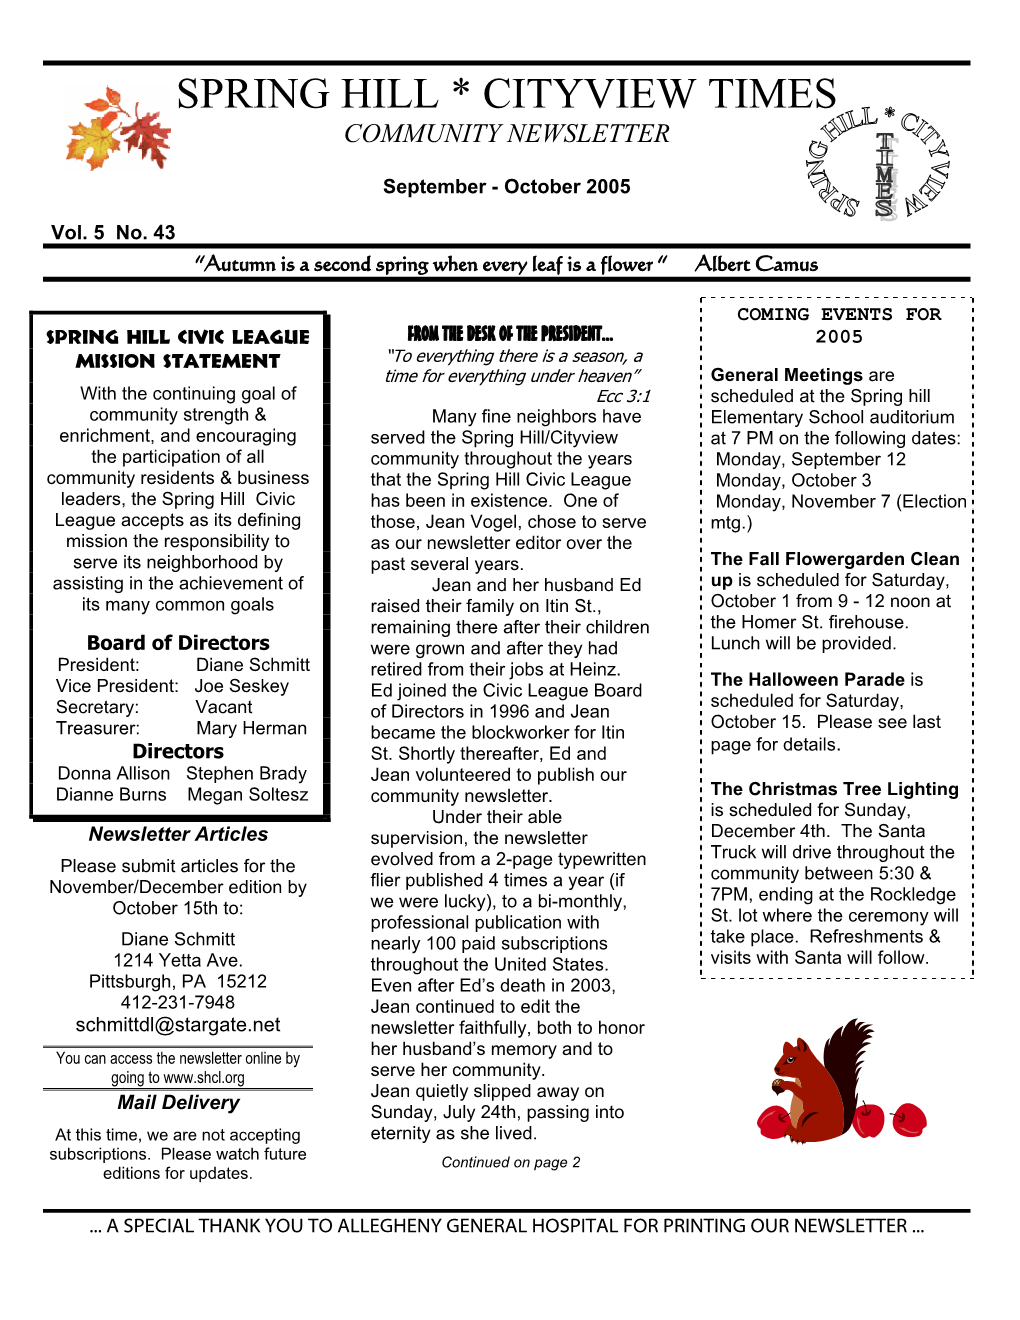 Spring Hill * Cityview Times Community Newsletter